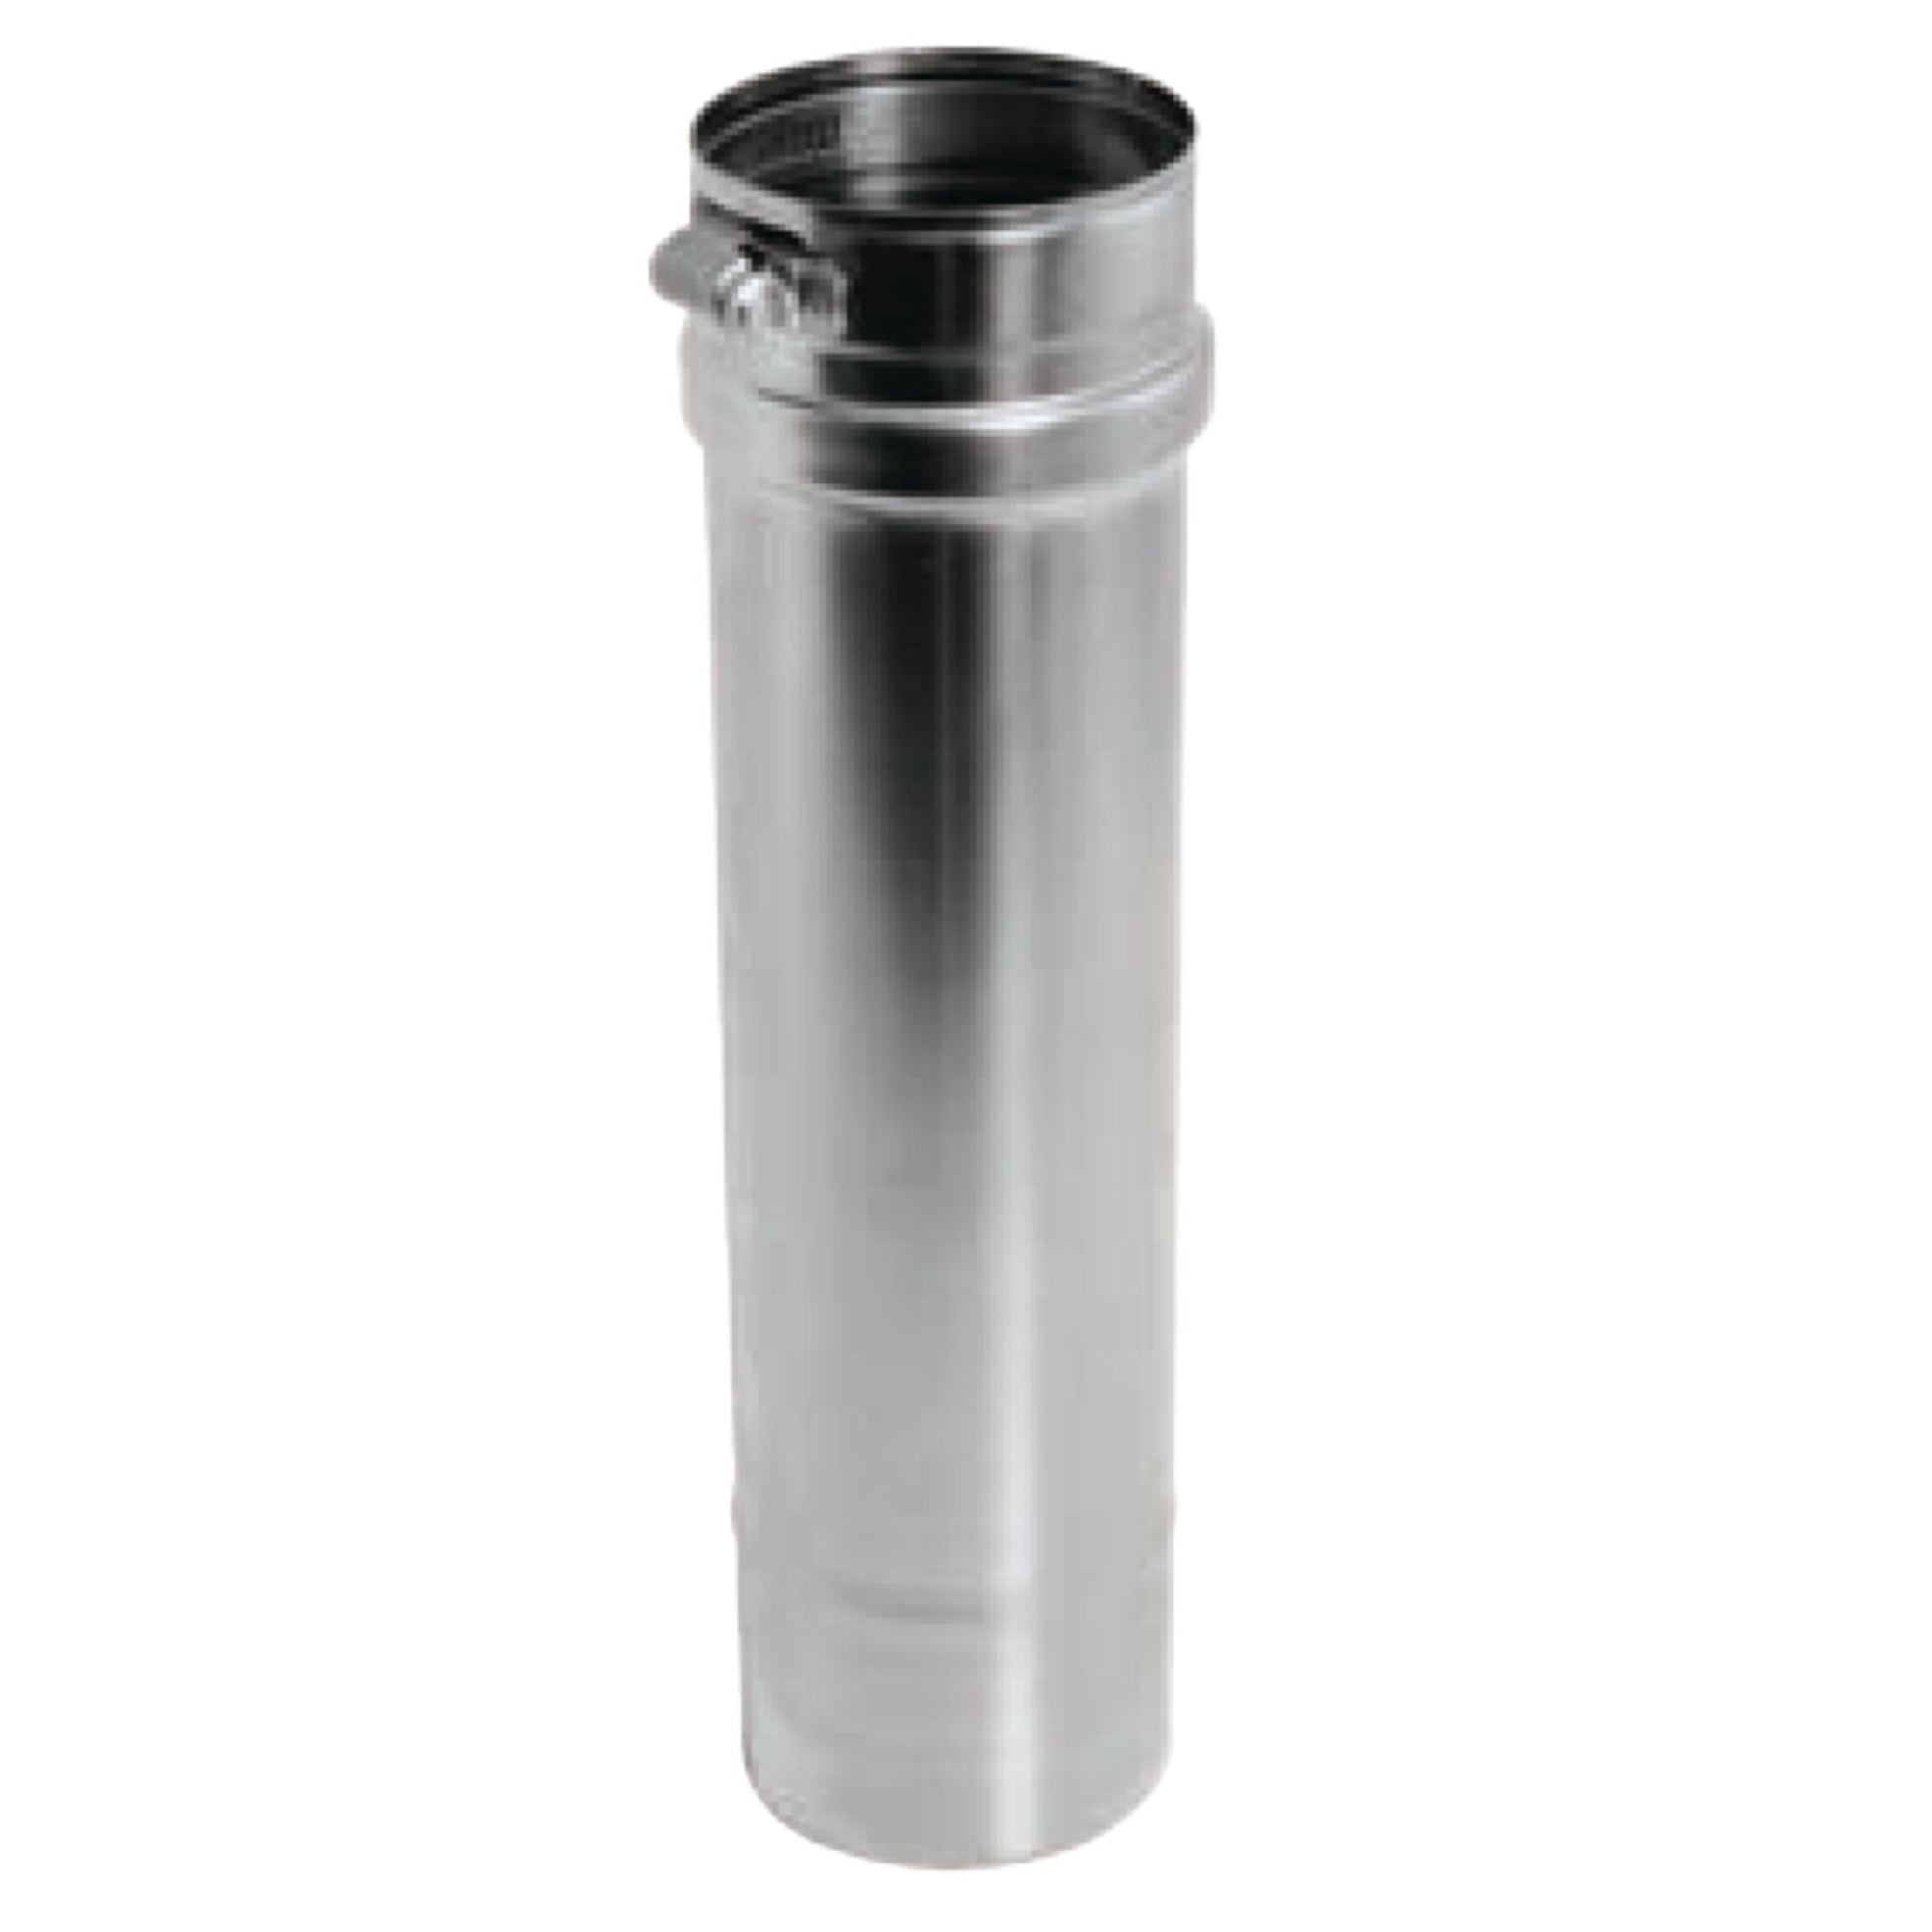 DuraVent FasNSeal 6" x 6" 29-4C Stainless Steel Vent Length